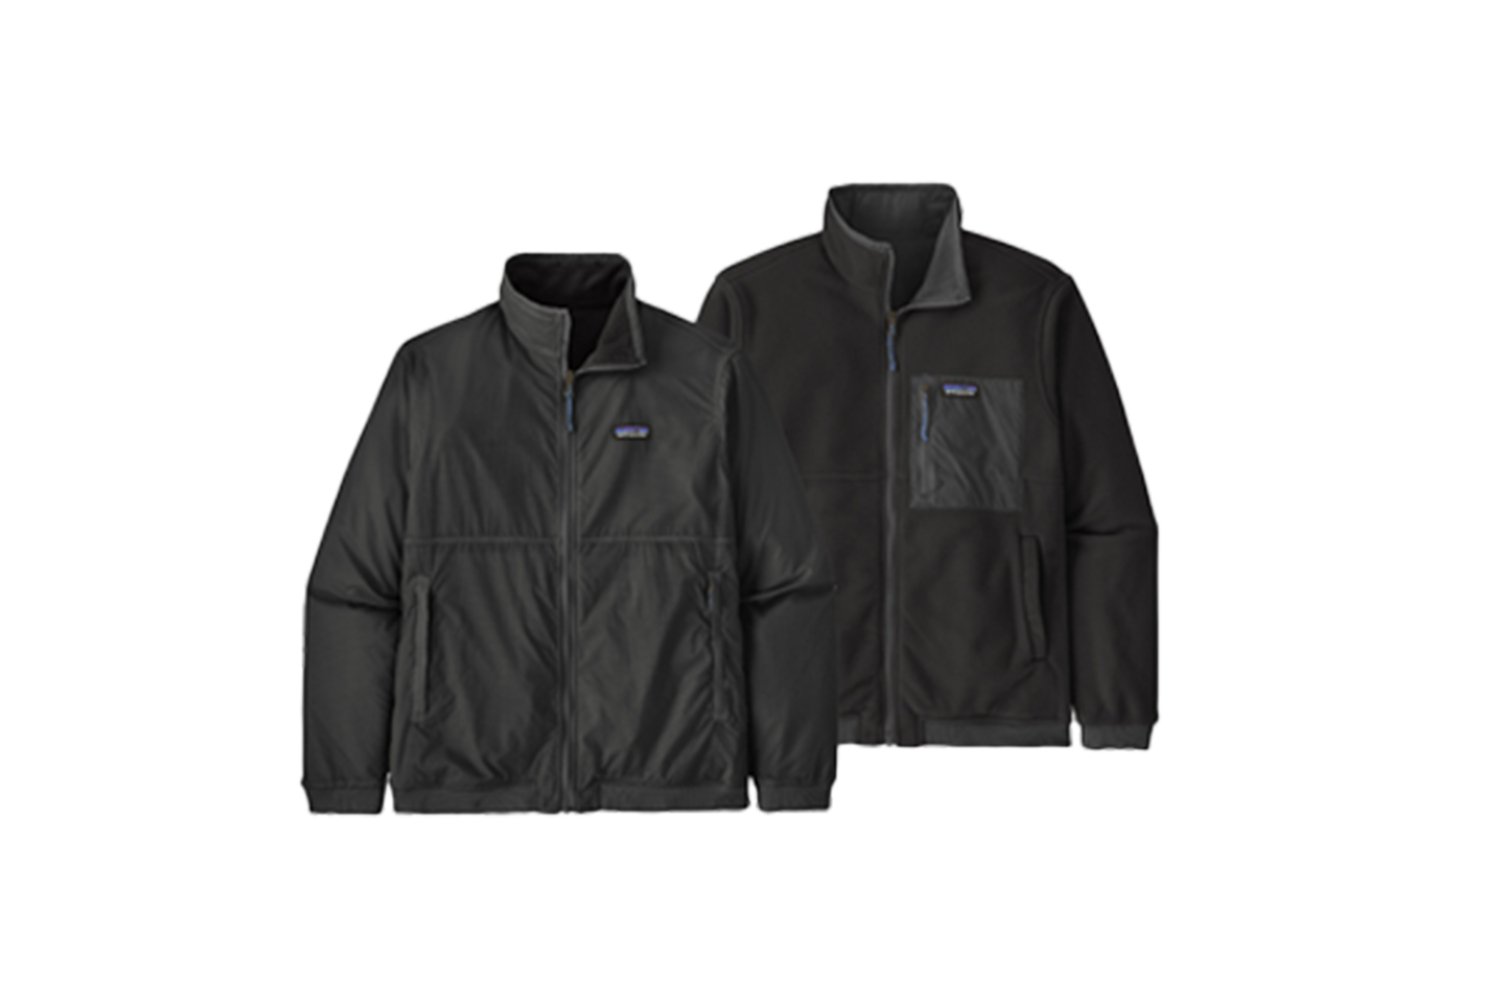 patagonia / M's Reversible Shelled Microdini Jkt<img class='new_mark_img2' src='https://img.shop-pro.jp/img/new/icons1.gif' style='border:none;display:inline;margin:0px;padding:0px;width:auto;' />